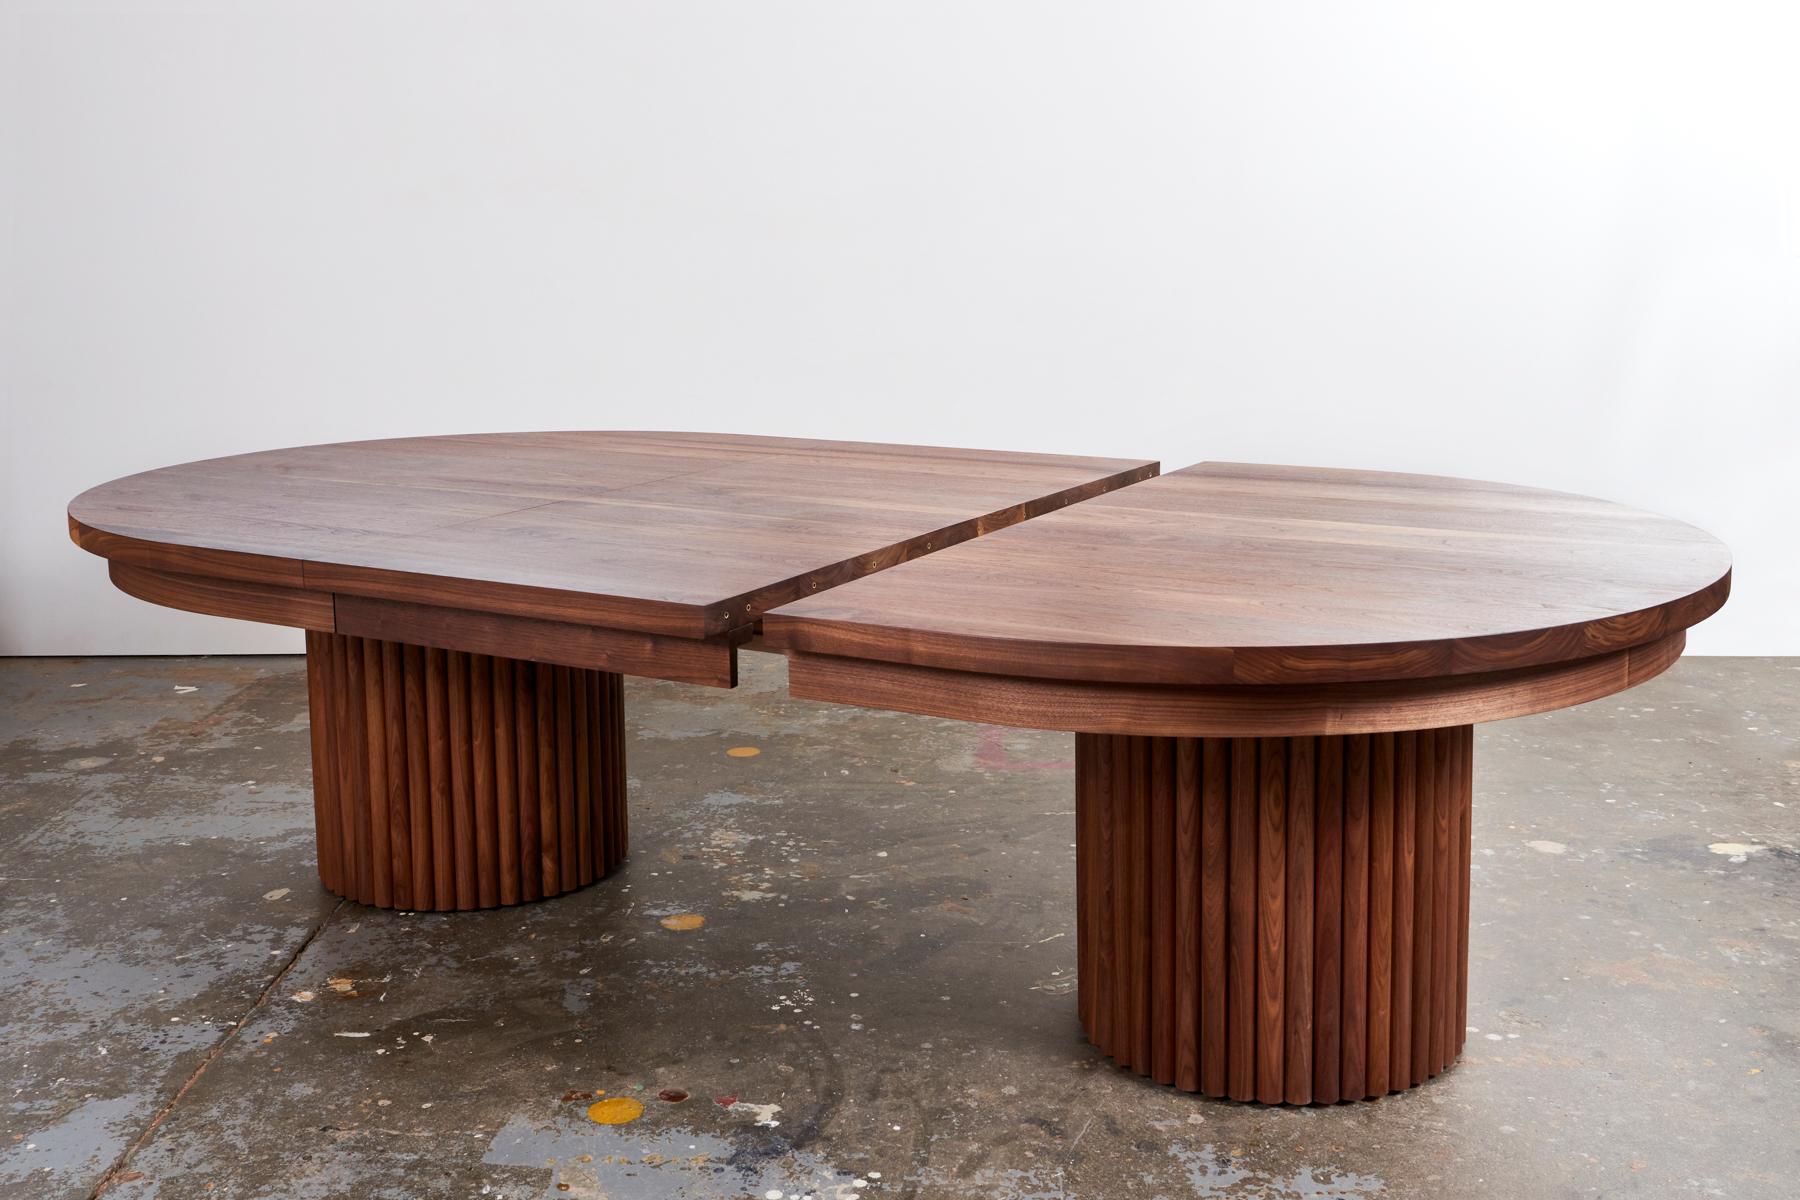 Unapologetically bold, Kate Duncan's dining table is a statement piece that pays homage to both a contemporary aesthetic as well as brutalist architecture. Columns of coopered splines and a hefty solid wood top create a table you just can’t miss.